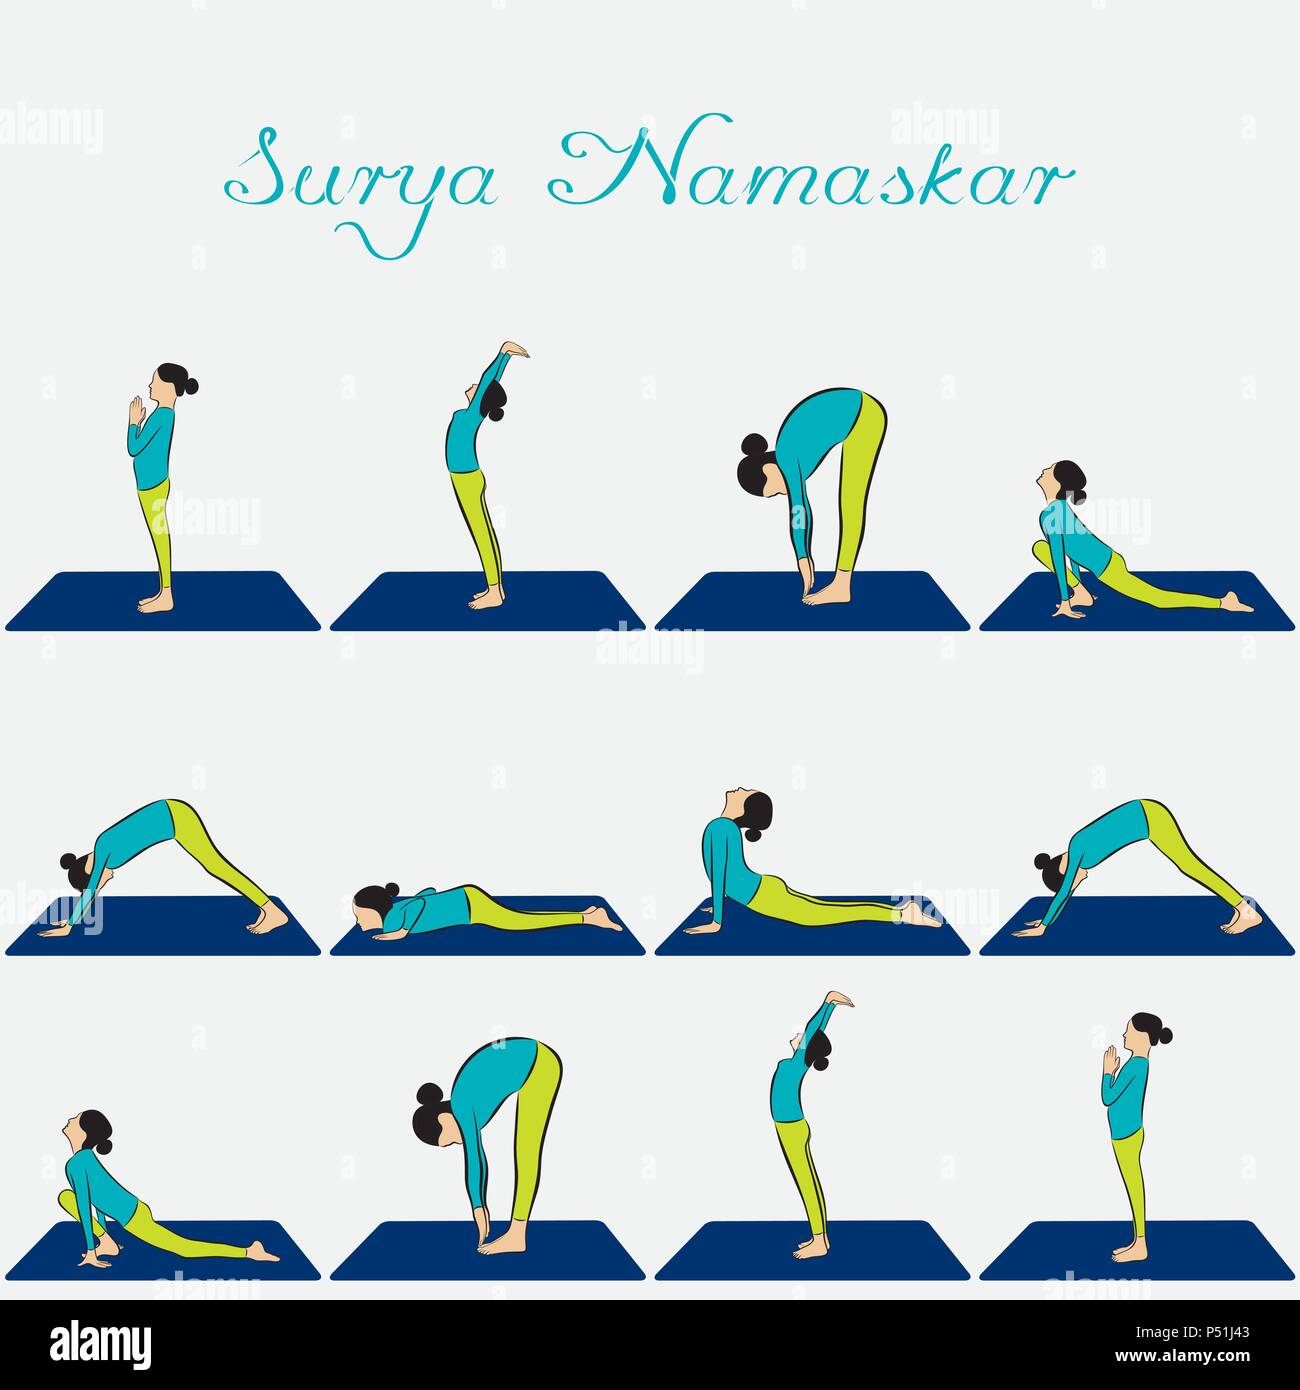 YOGA POSES : IMAGES, GIF, ANIMATED GIF, WALLPAPER, STICKER FOR WHATSAPP &  FACEBOOK | Animated gif, Yoga poses, Animation